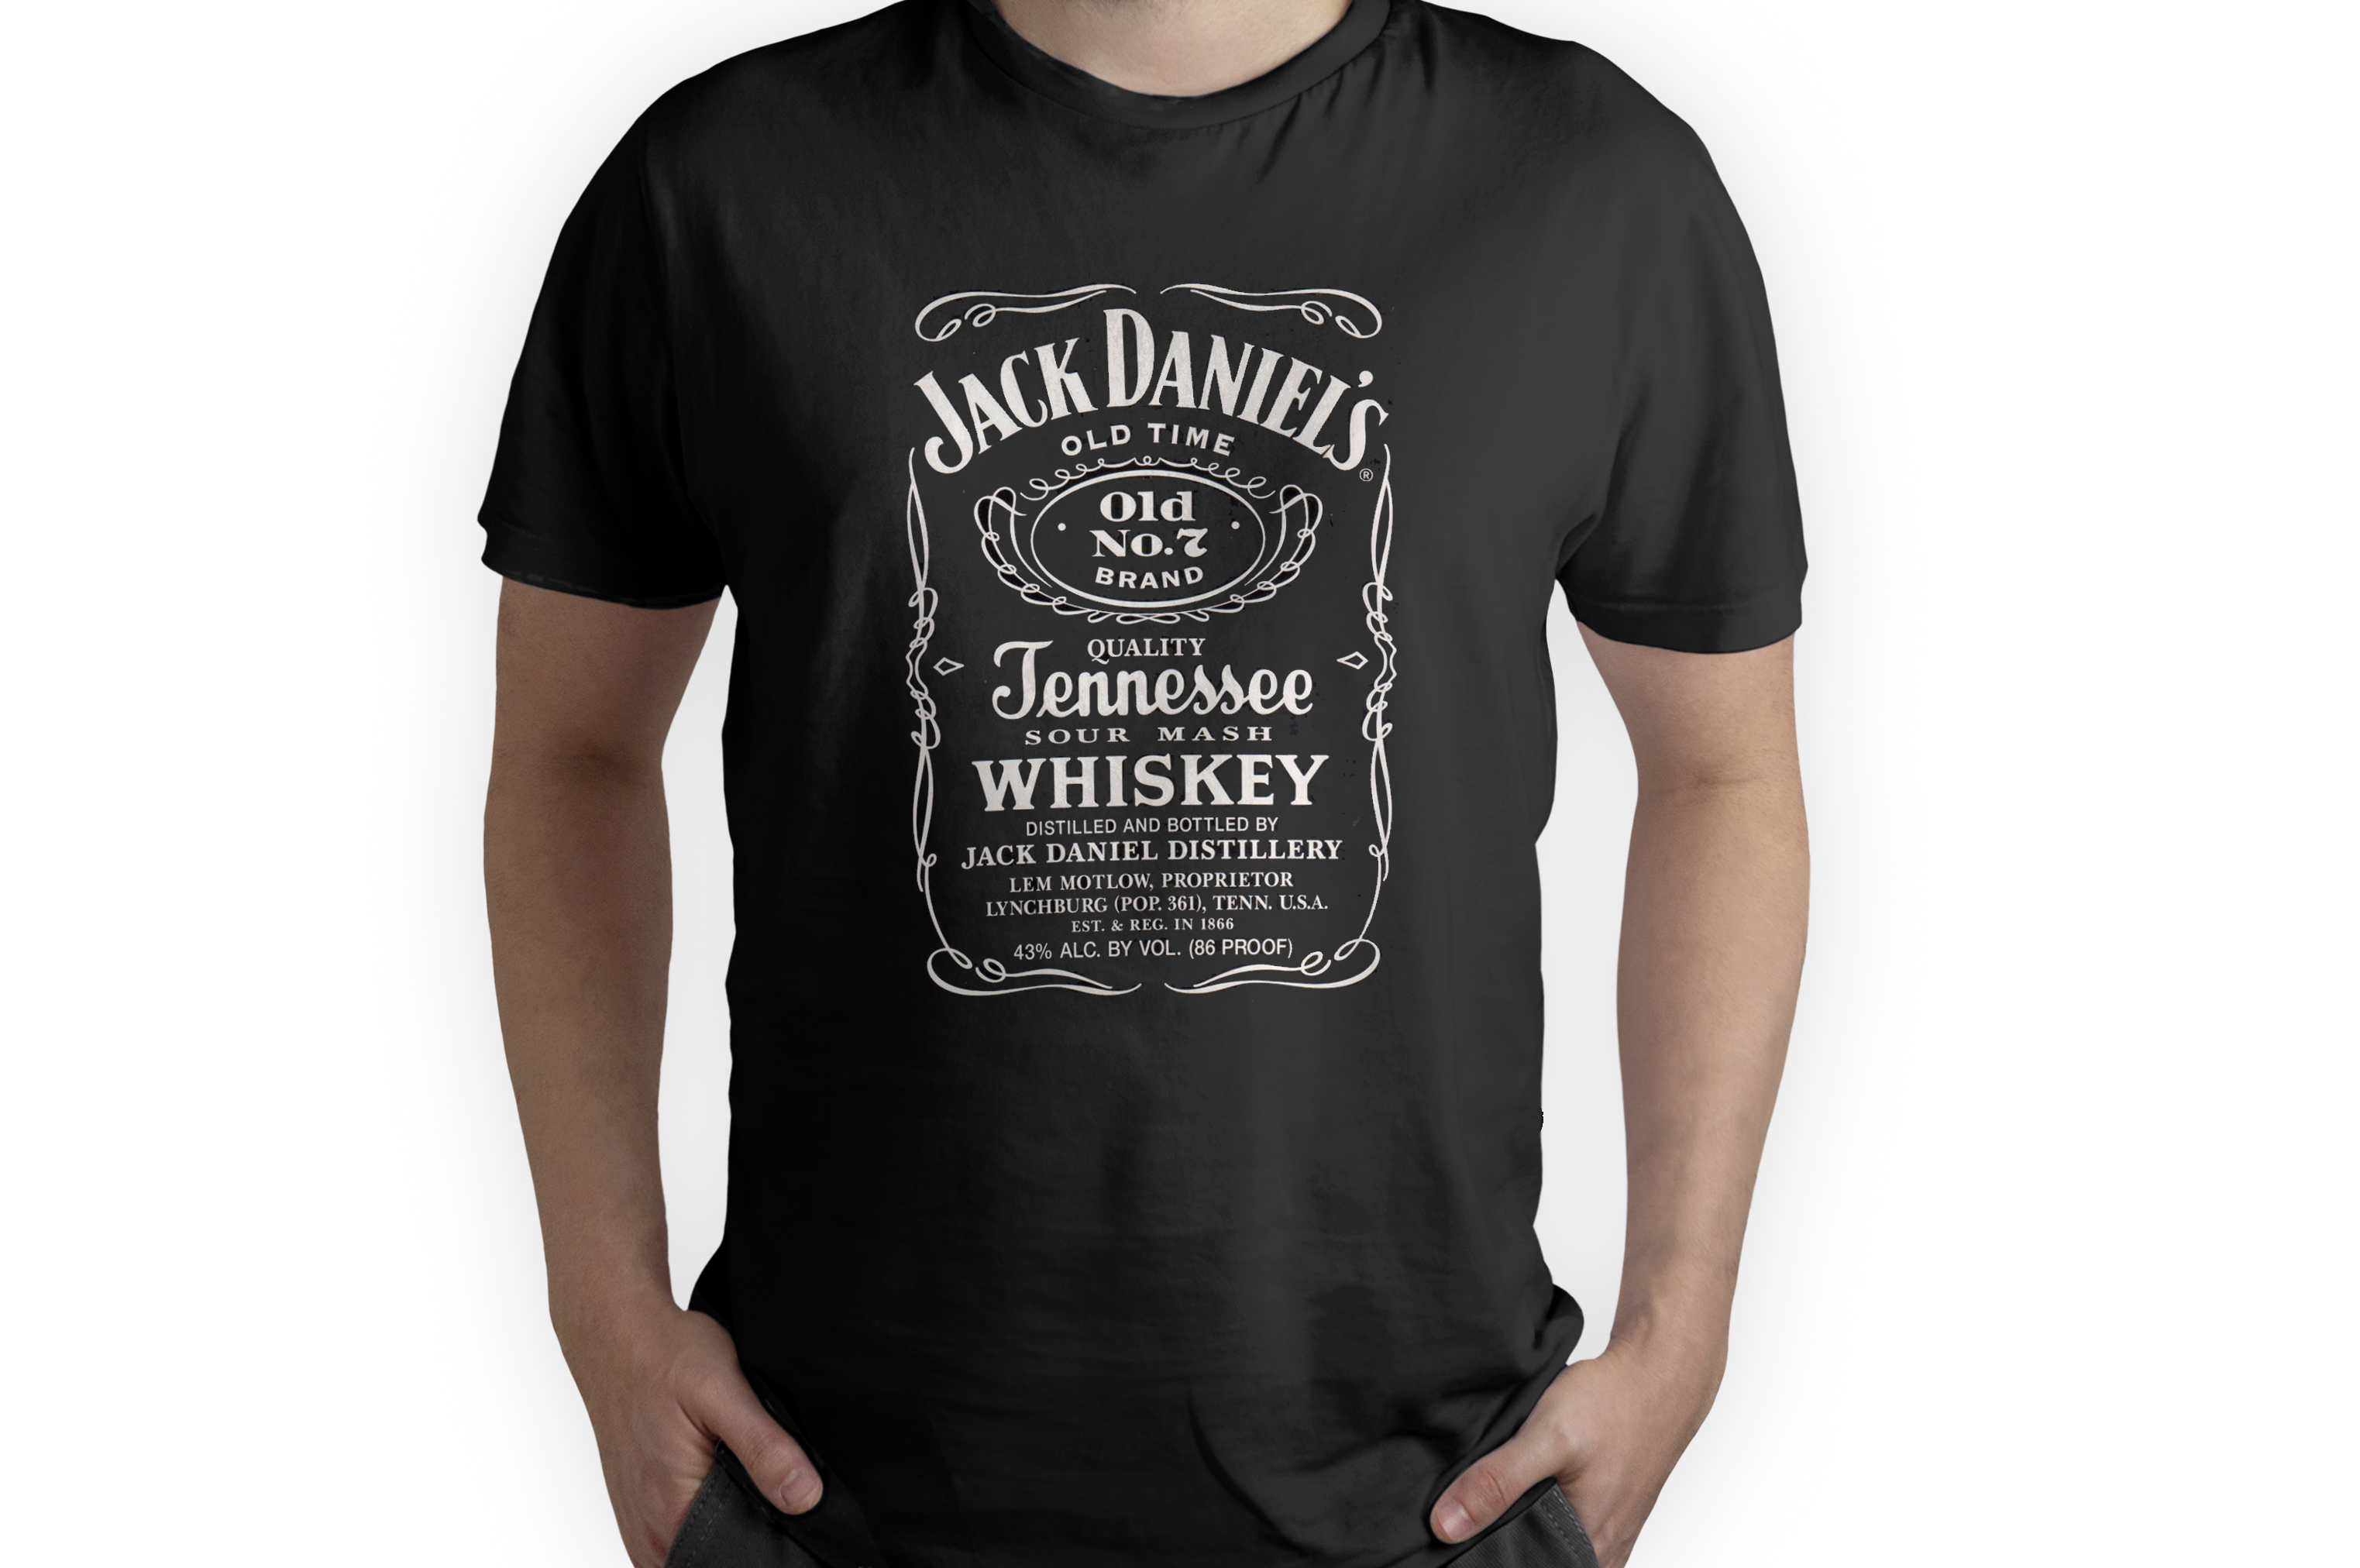 Jack Daniels Tennessee Sour Mash Whiskey Shirt Full Size Up To 5xl | Trending Shirts